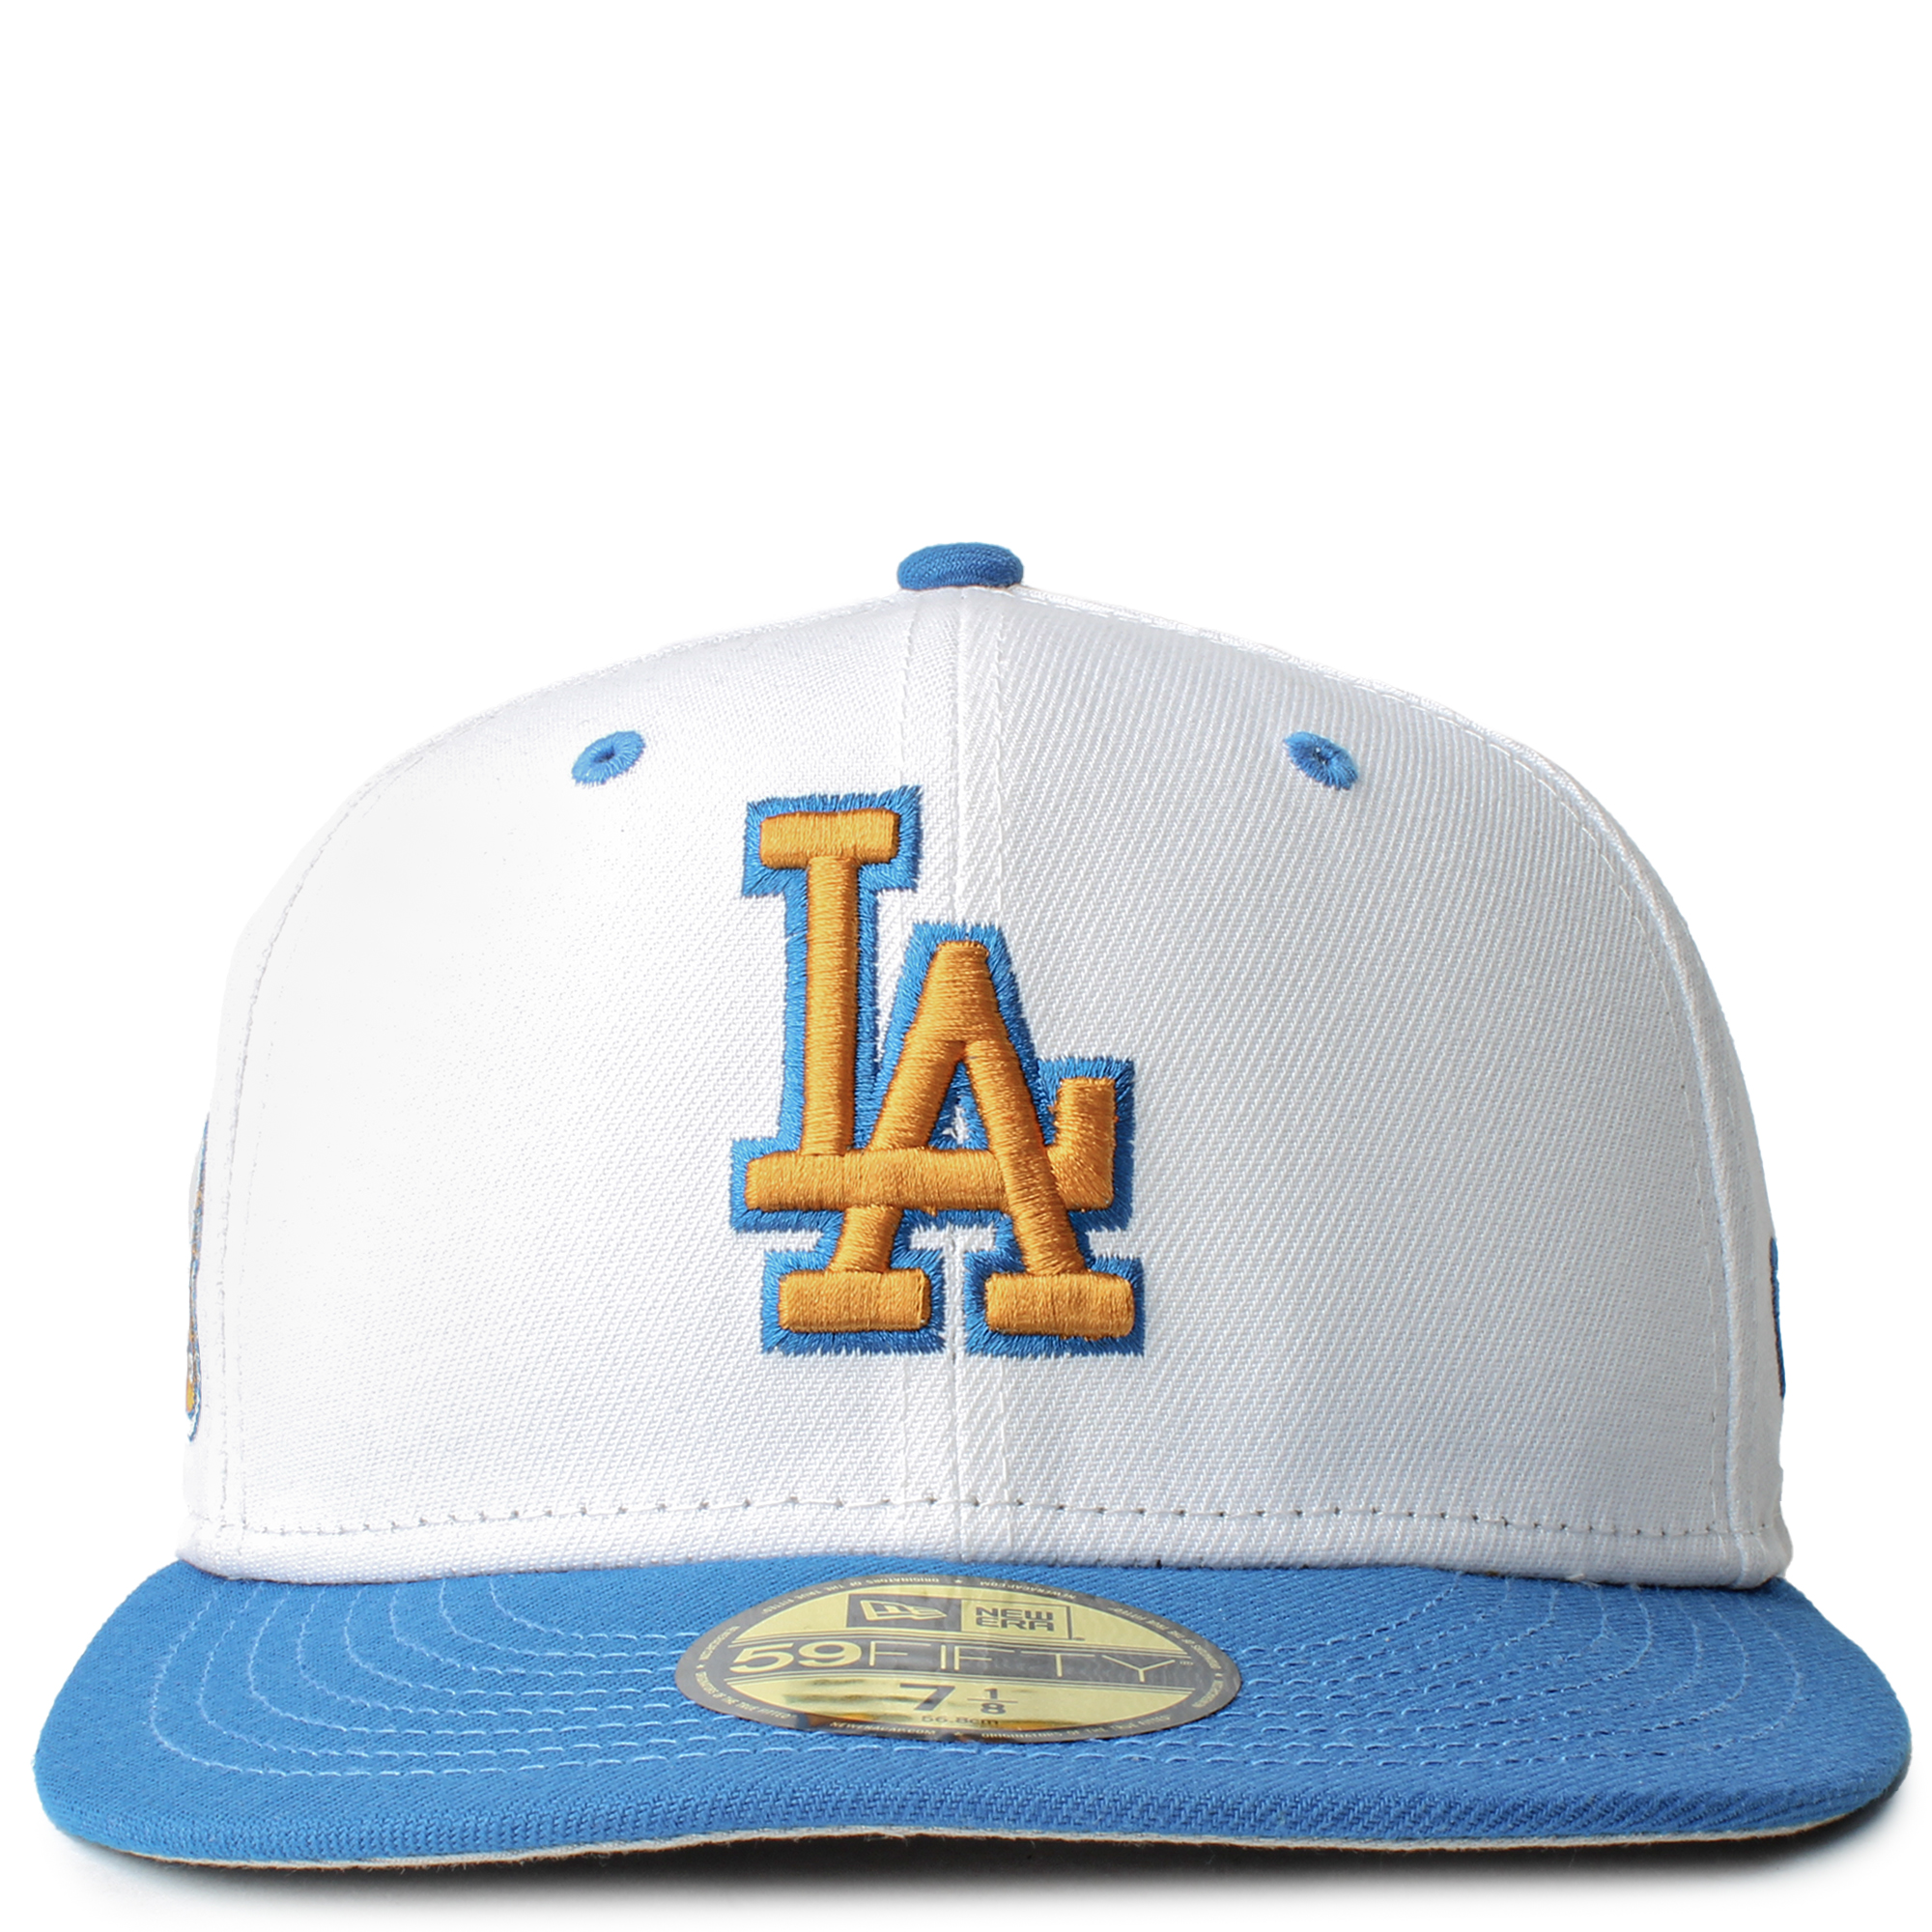 Make your own 59Fifty Fitted Cap - The Custom Lids Experience